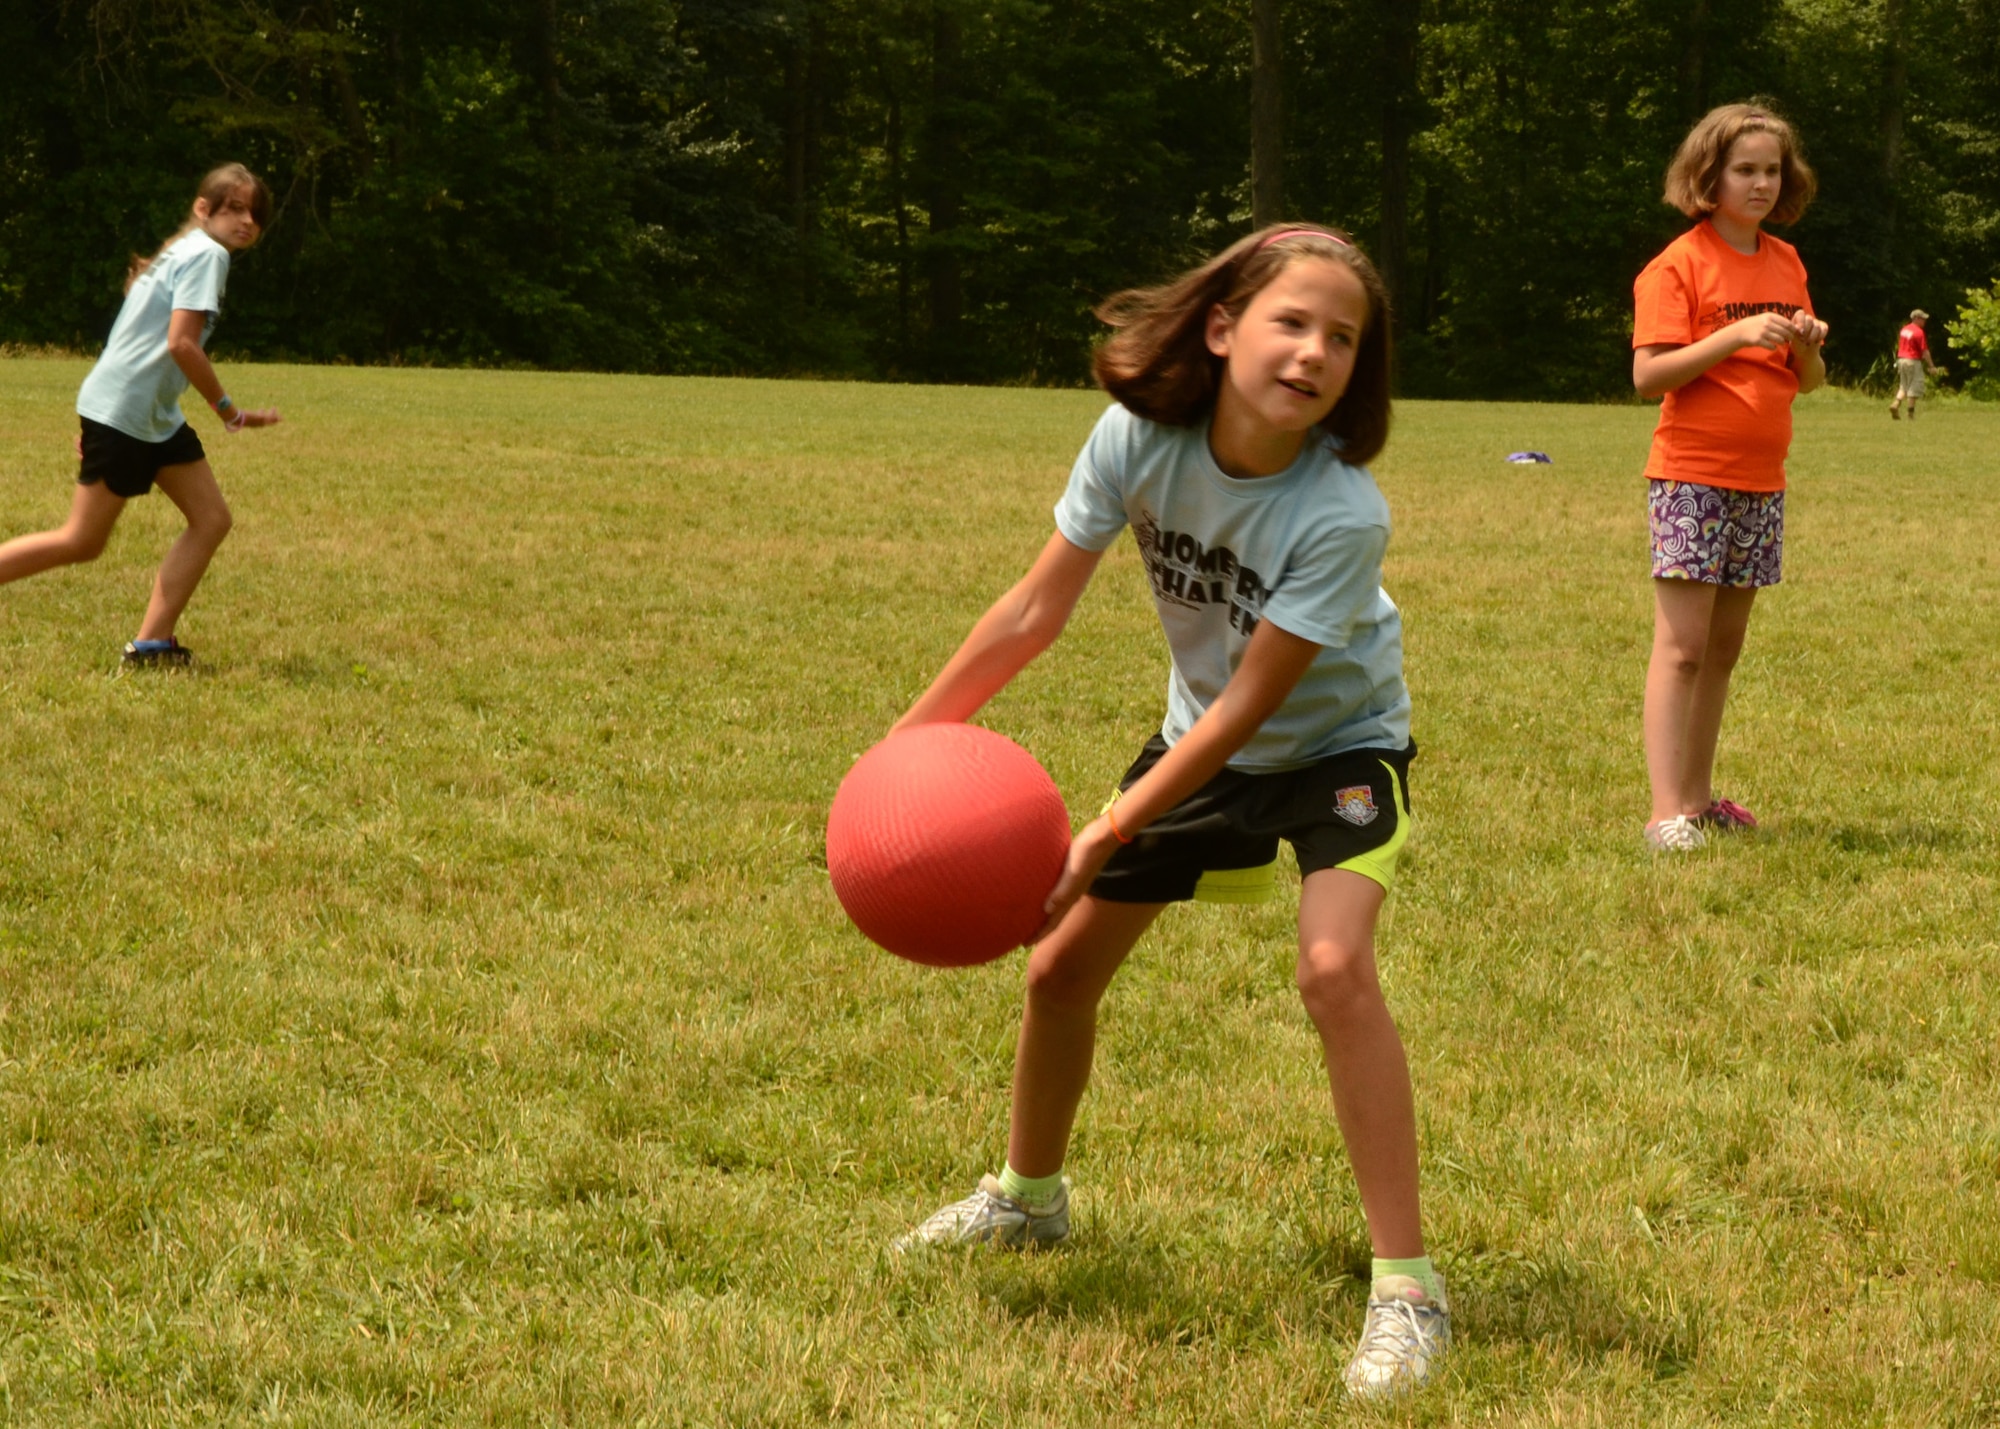 Jamie Llewellyn, a camper at the Homefront Challenge Camp pitches the ball during a kickball game.  The Homefront Challenge Camp is a week-long camp for children who have parents or guardians serving in the Maryland Army or Air Force National Guard.  The campers have the opportunity to participate in many different activities including flag football, kickball and archery. The Homefront Challenge took place over the week of June 20-24 at Rock State Park in Jarrettsville, Maryland.